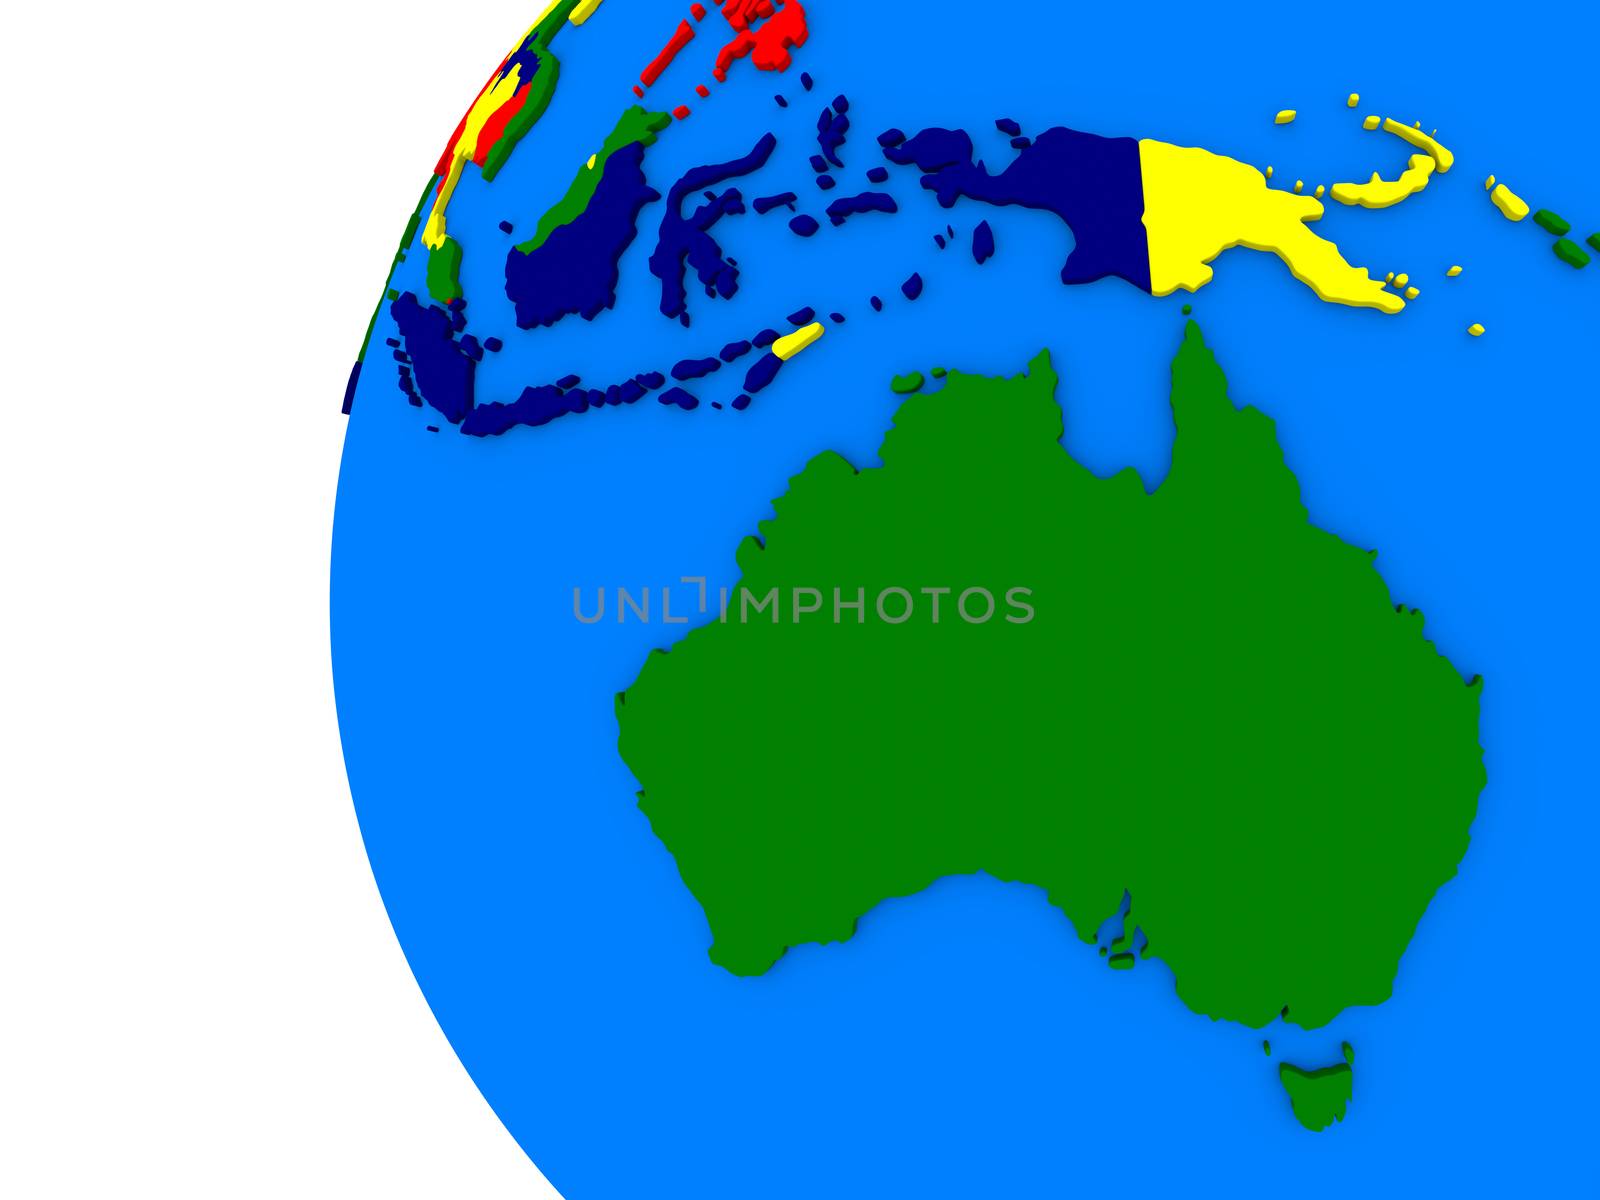 Australian continent on political globe by Harvepino